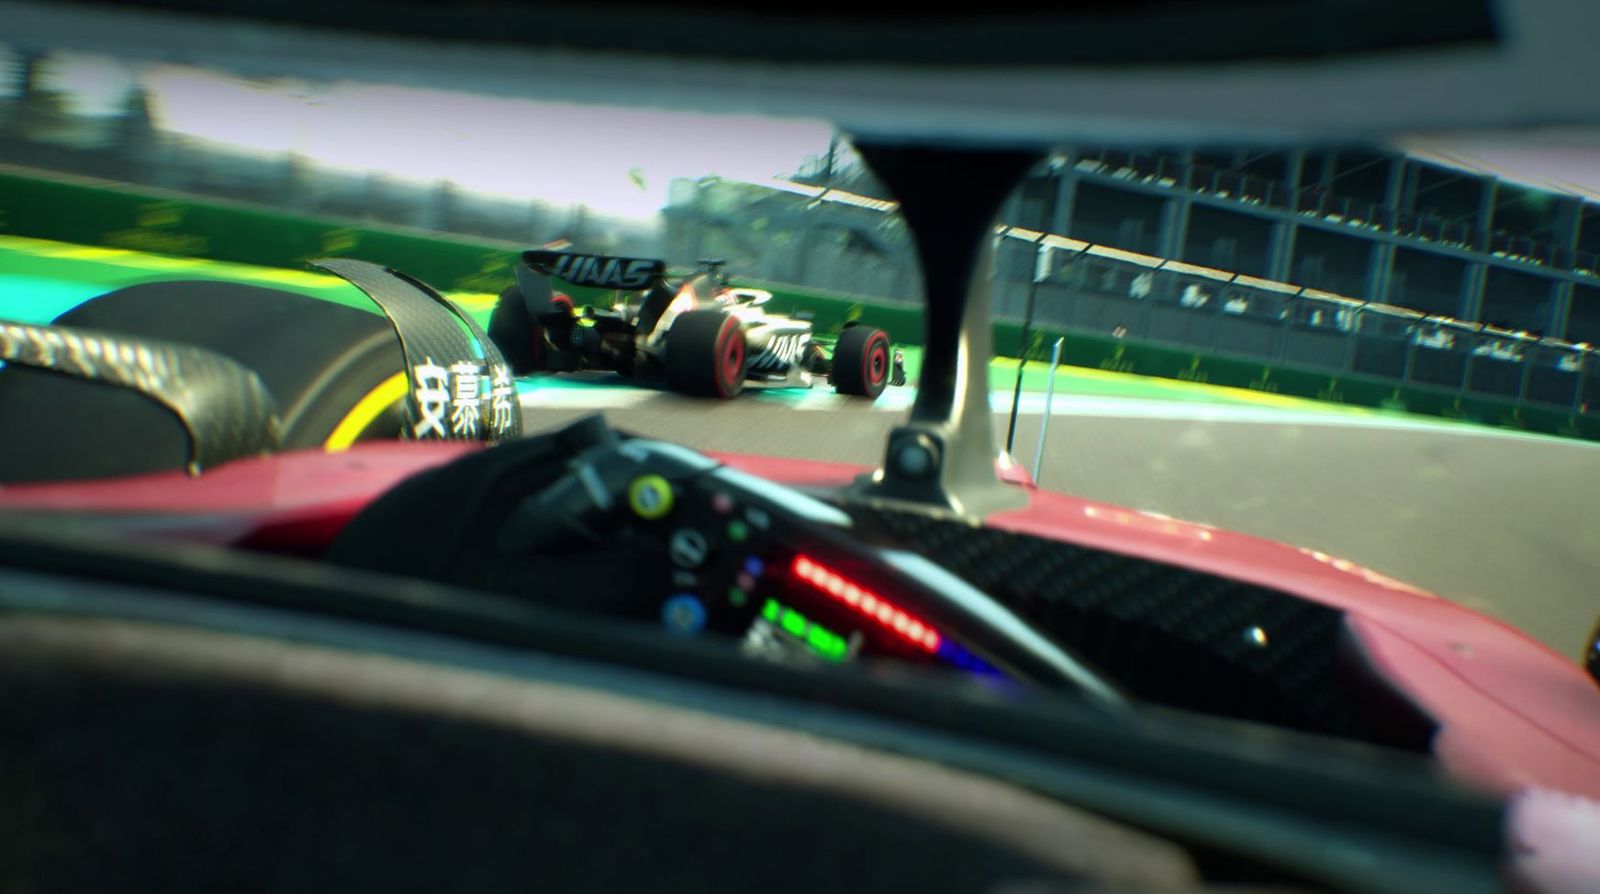 On board with Guanyu Zhou's visor cam in F1 Manager 2023